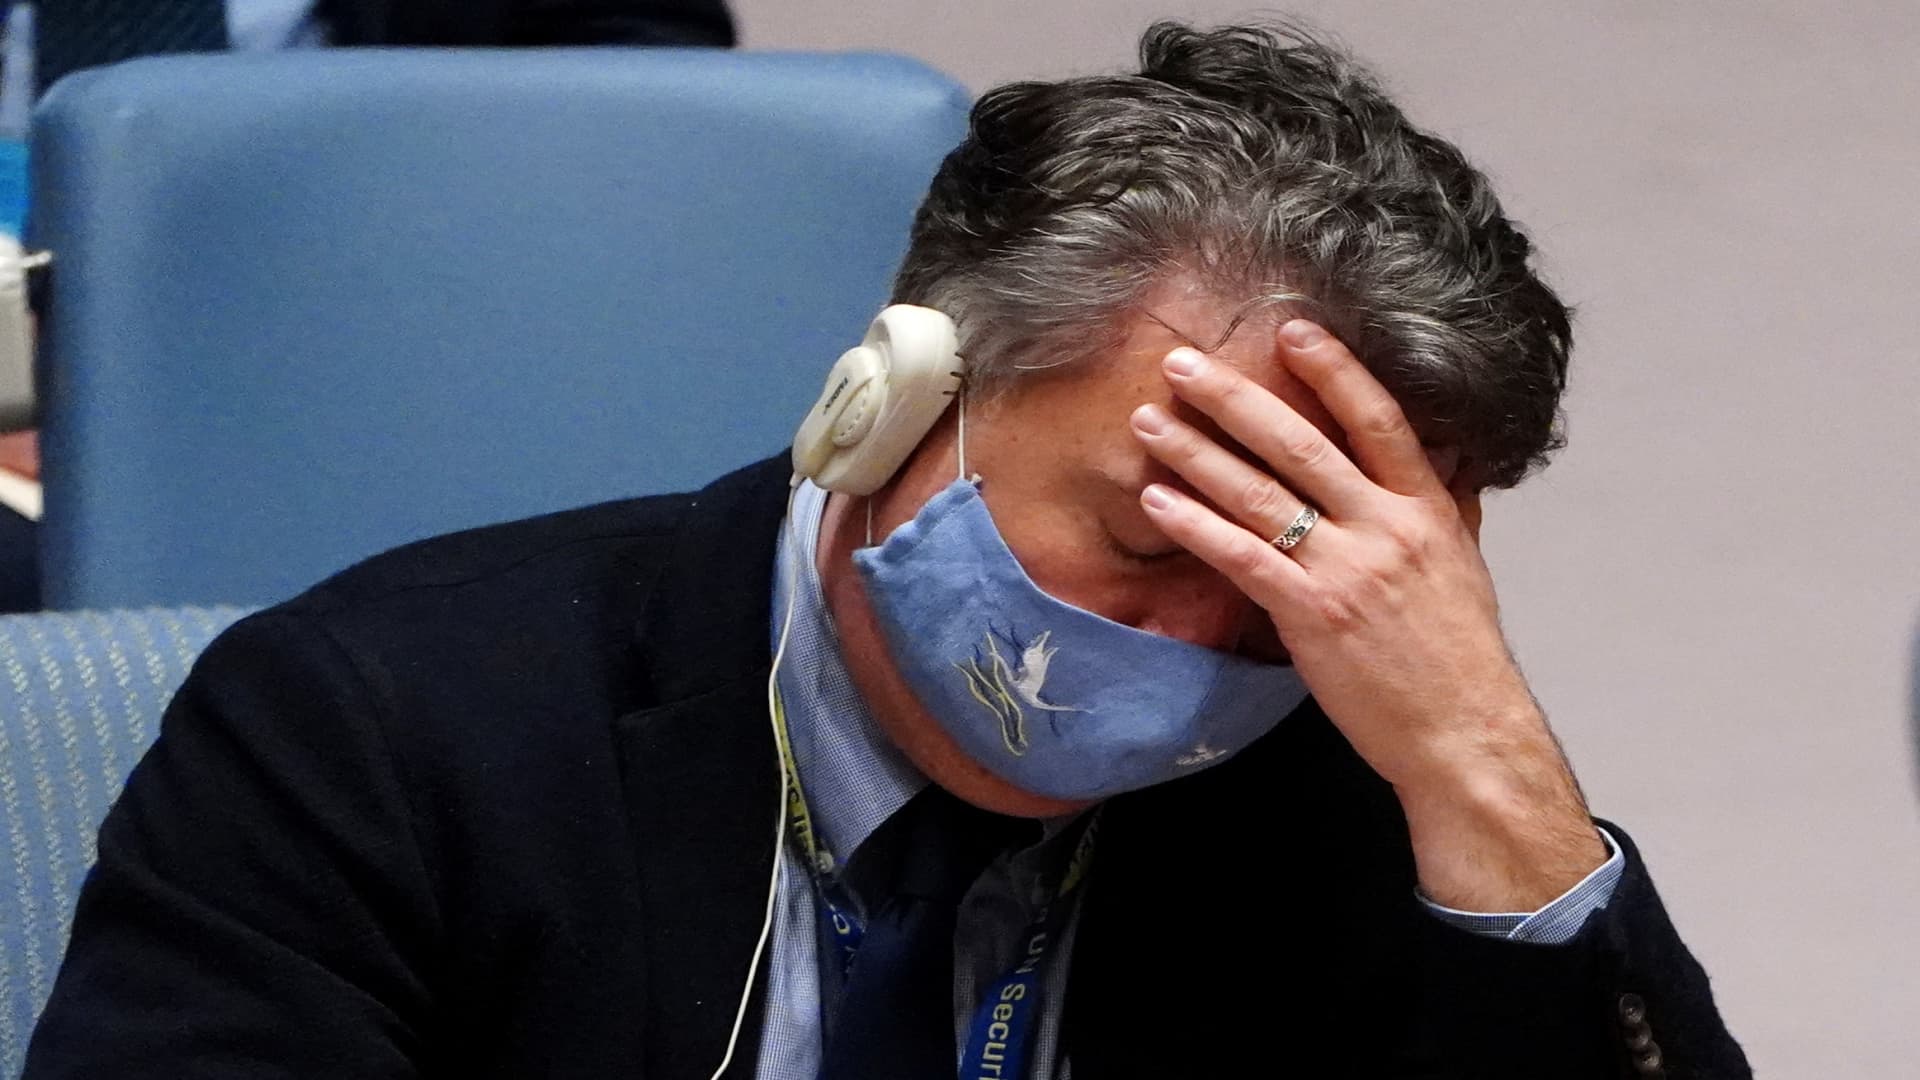 Ukrainian Ambassador to the United Nations Sergiy Kyslytsya reacts during a United Nations Security Council meeting, on a resolution regarding Russia's actions toward Ukraine, at the United Nations Headquarters in New York City, U.S., February 25, 2022.